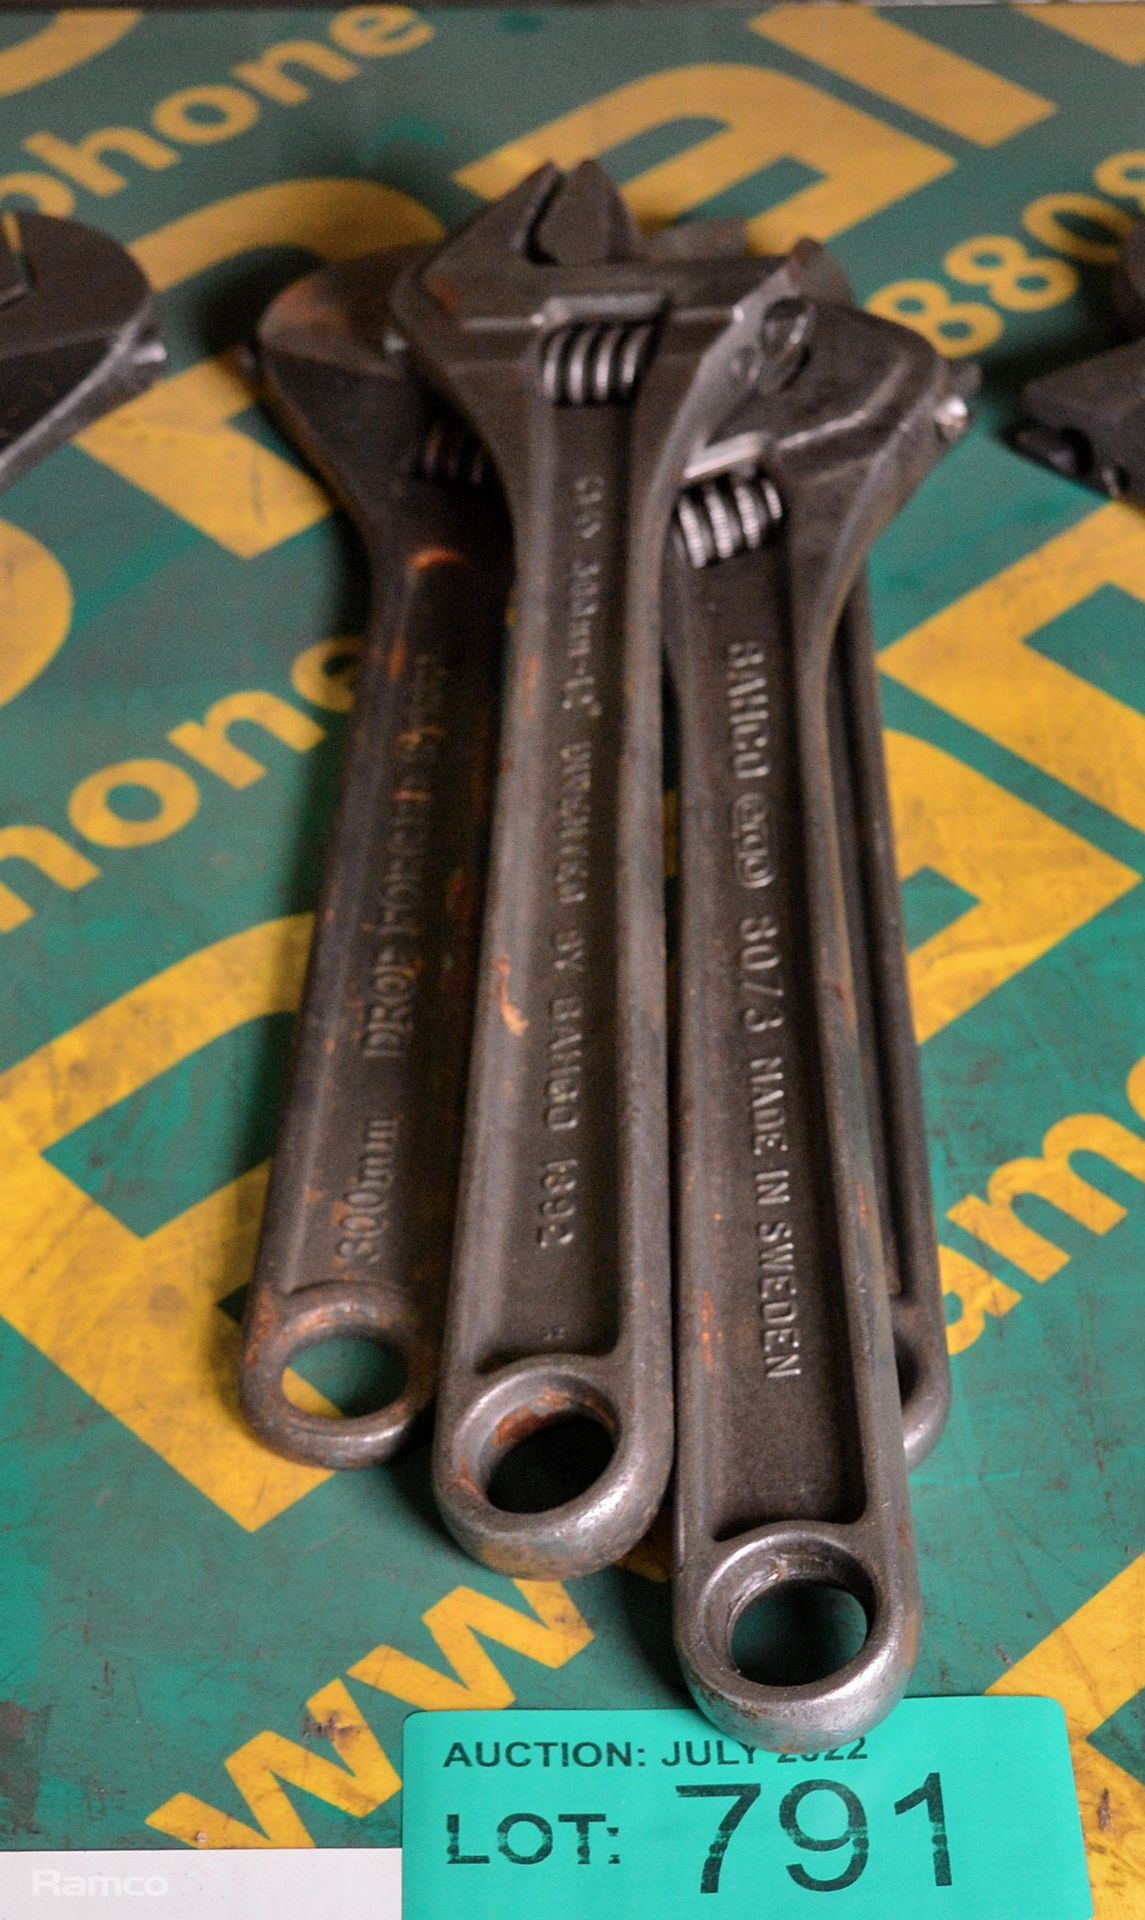 4x Adjustable wrenches